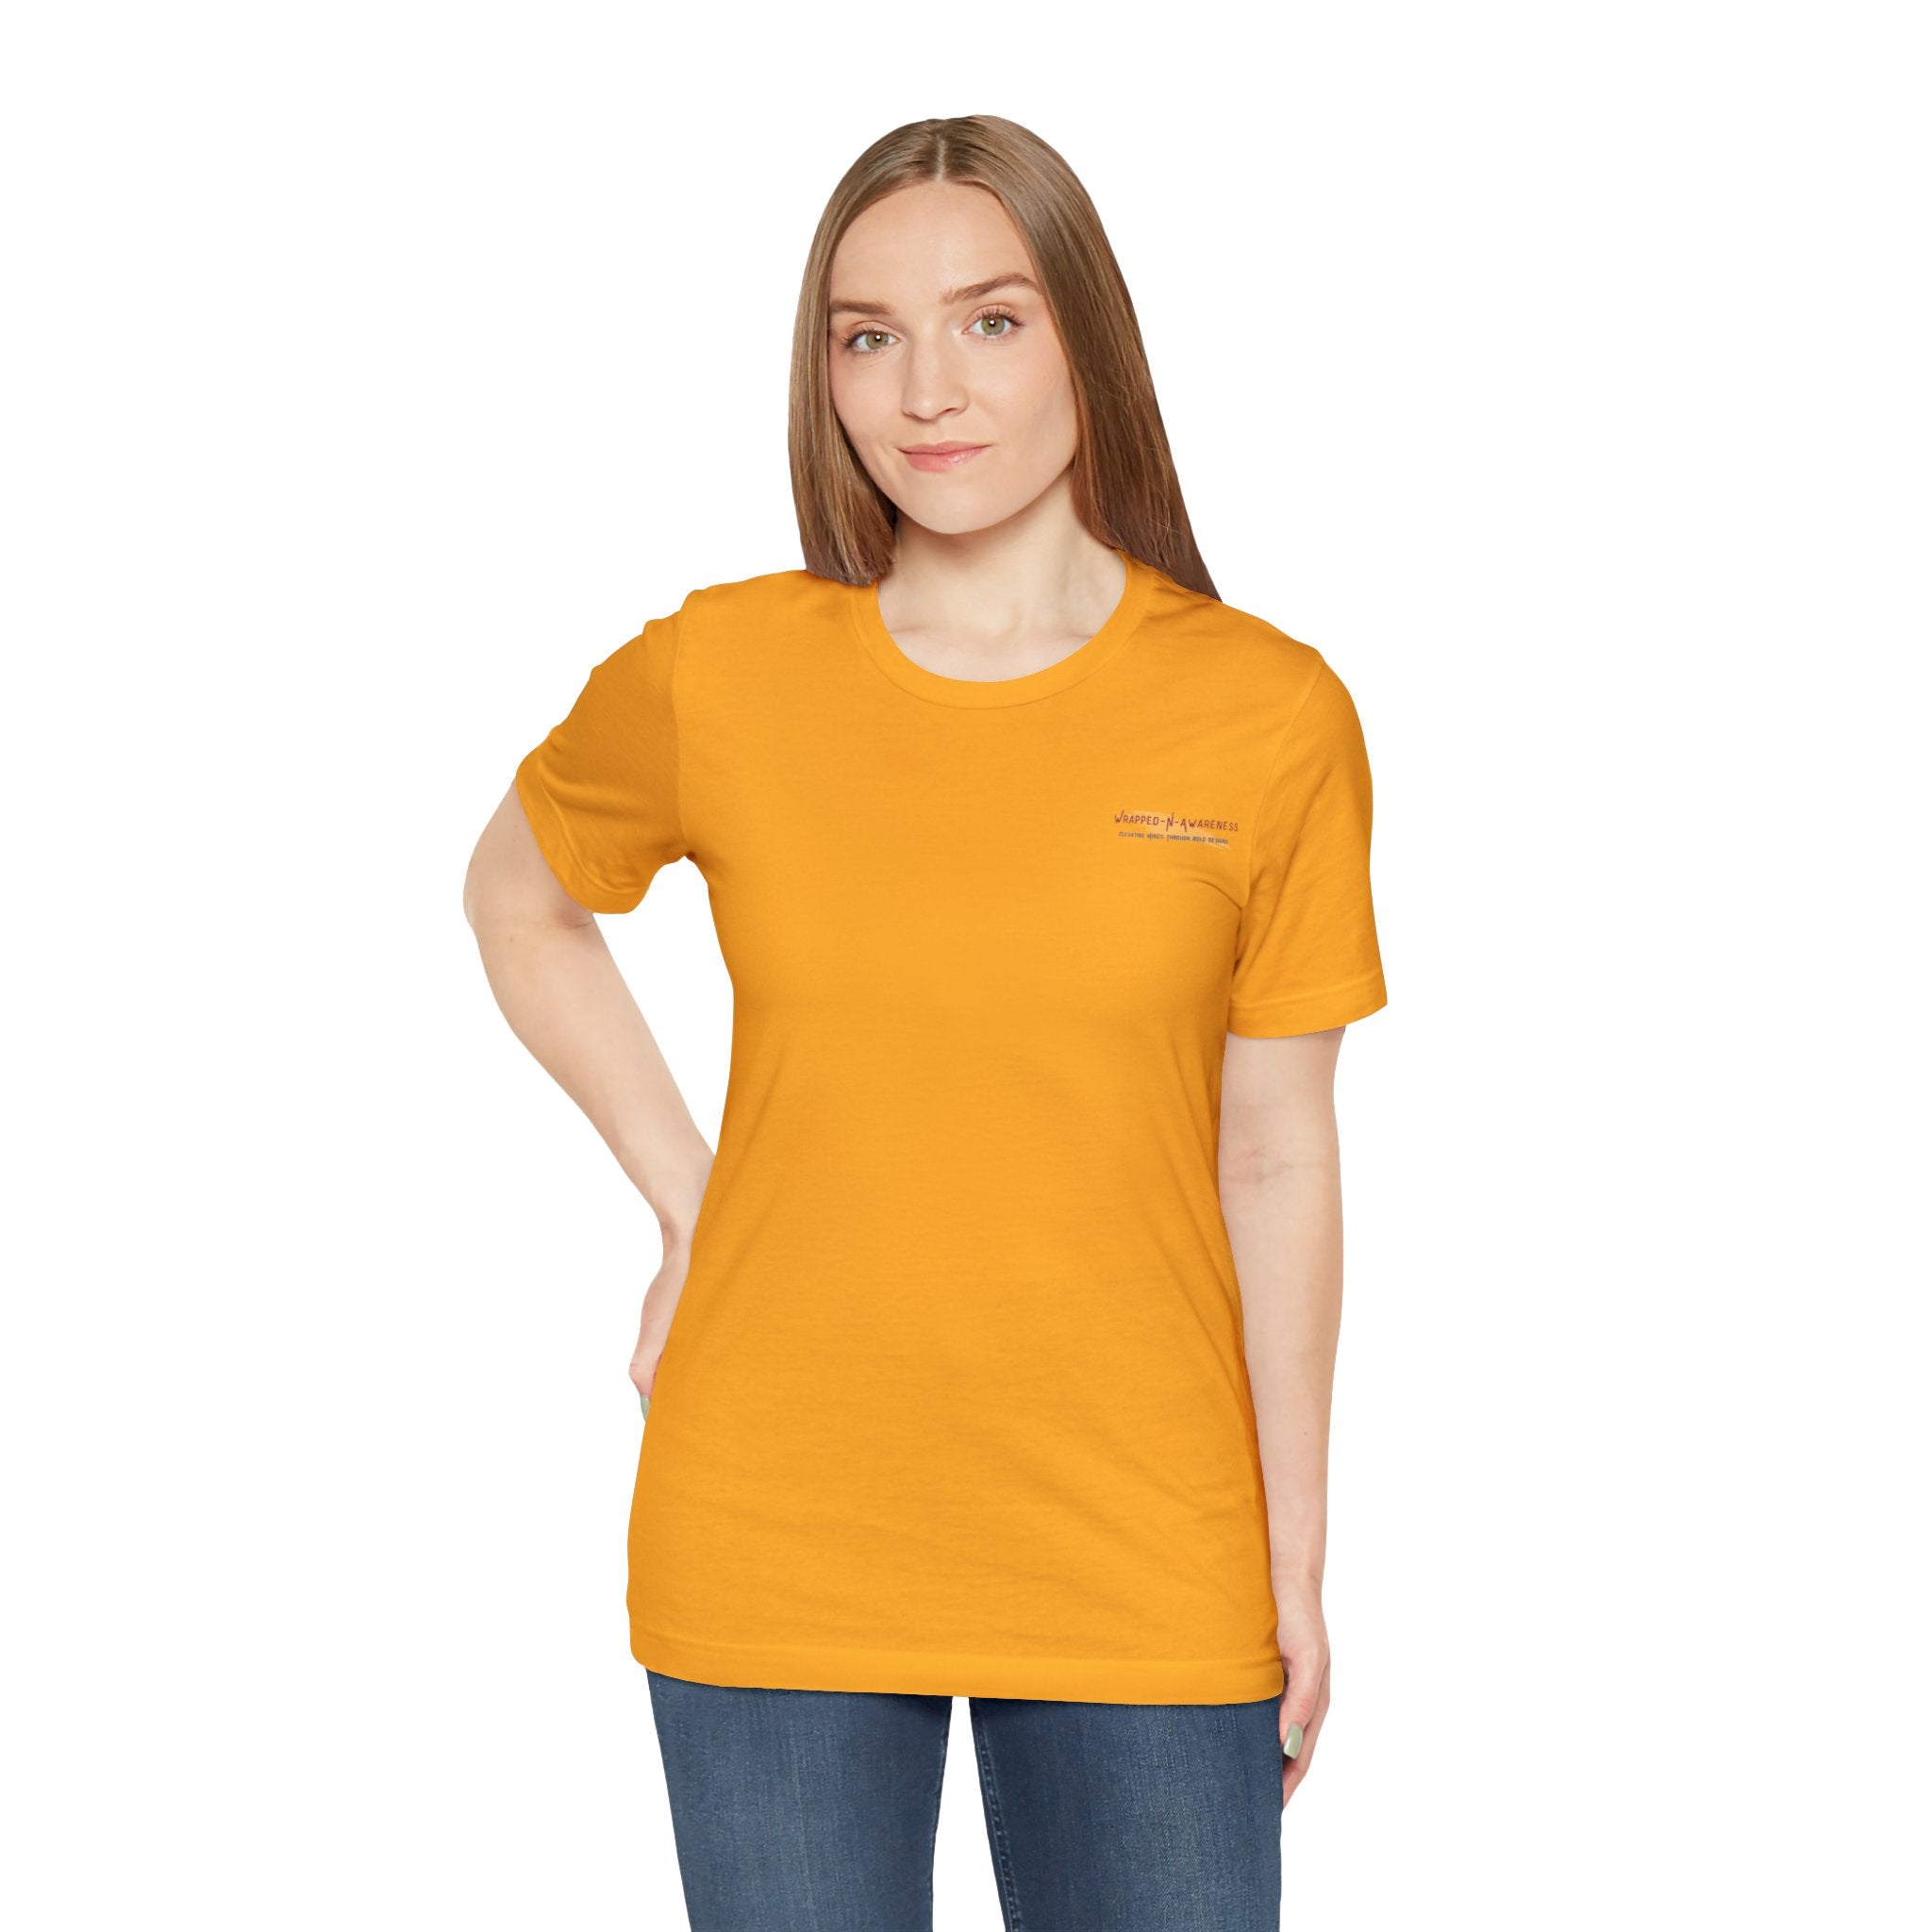 Progress Over Perfection Tee - Bella+Canvas 3001 Yellow Airlume Cotton Bella+Canvas 3001 Crew Neckline Jersey Short Sleeve Lightweight Fabric Mental Health Support Retail Fit Tear-away Label Tee Unisex Tee T-Shirt 13986495146743866844_2048 Printify